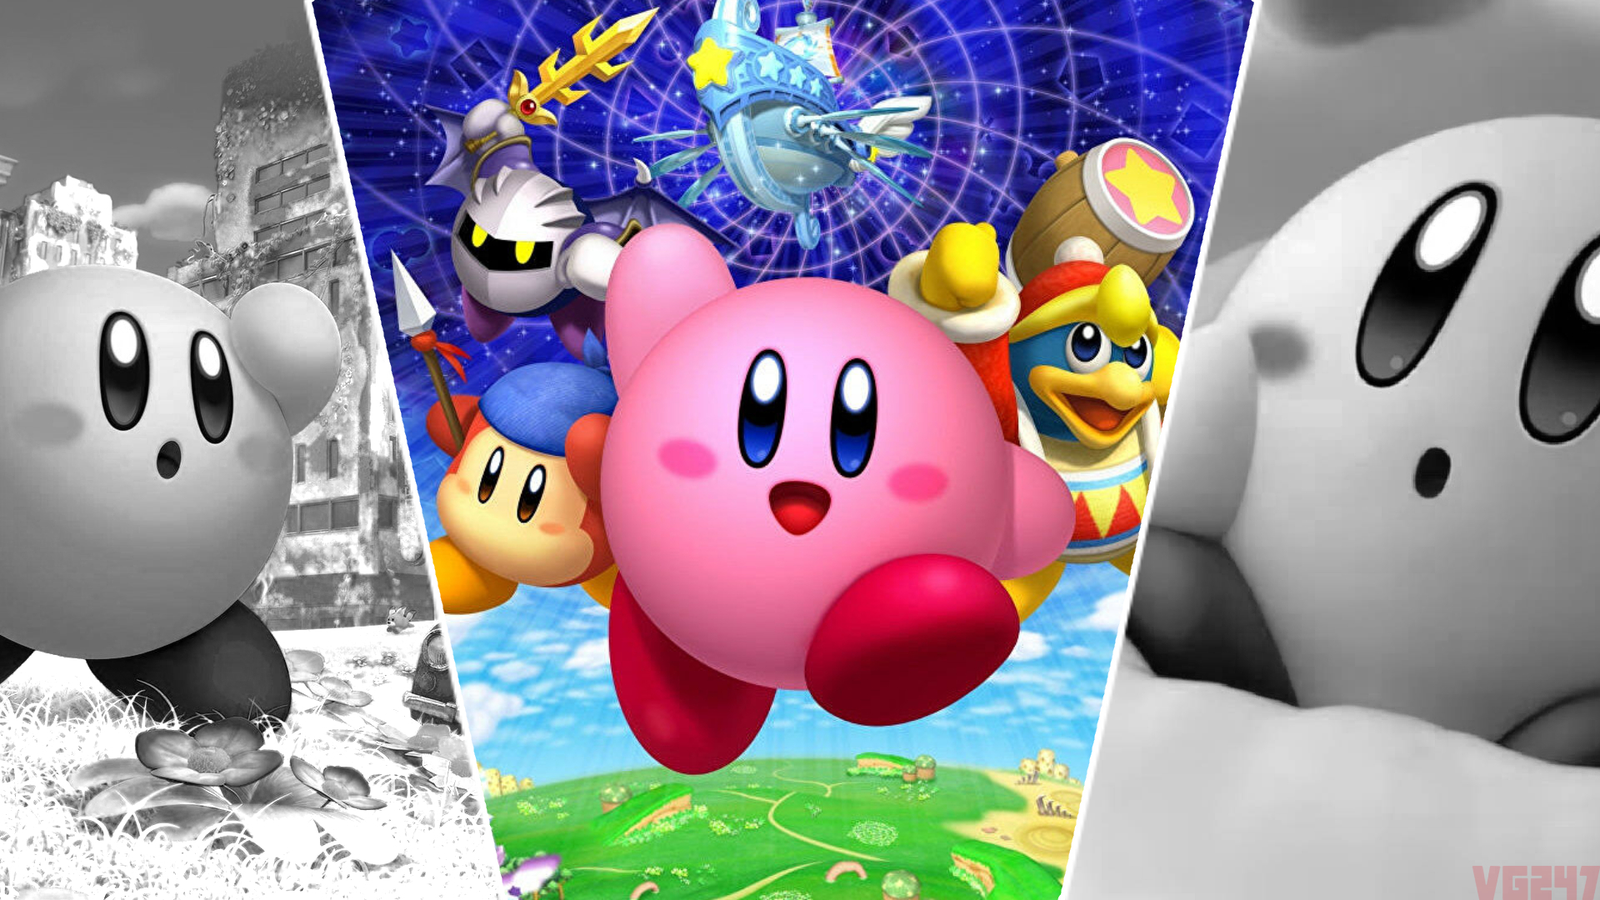 We're finally getting the Kirby co-op game for Switch that we deserve |  VG247